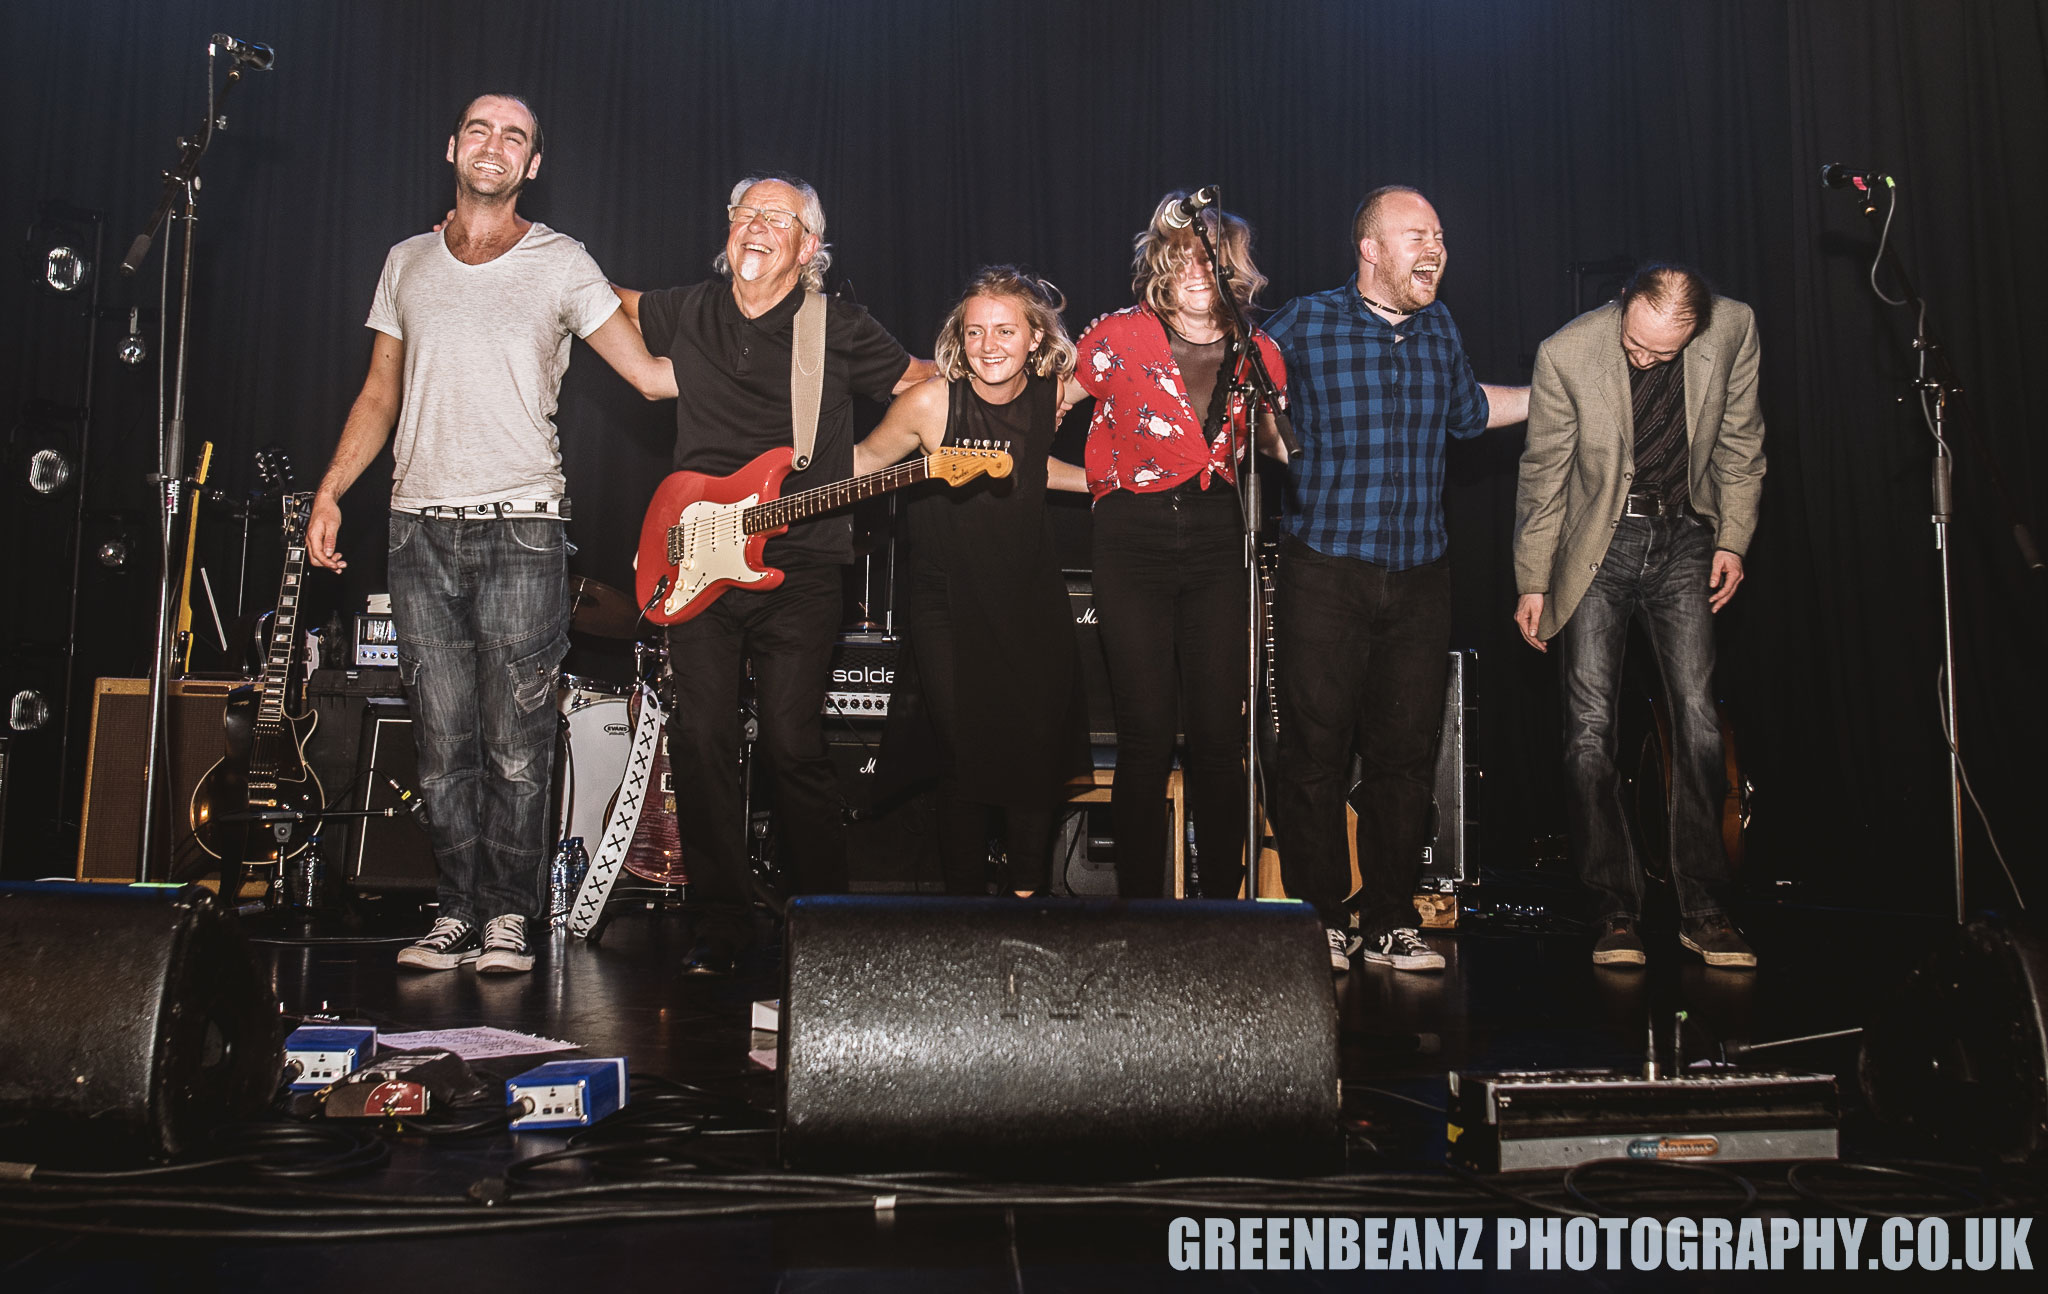 The Martin Barre Band at the end of Keeping Music Live Plymouth 2018